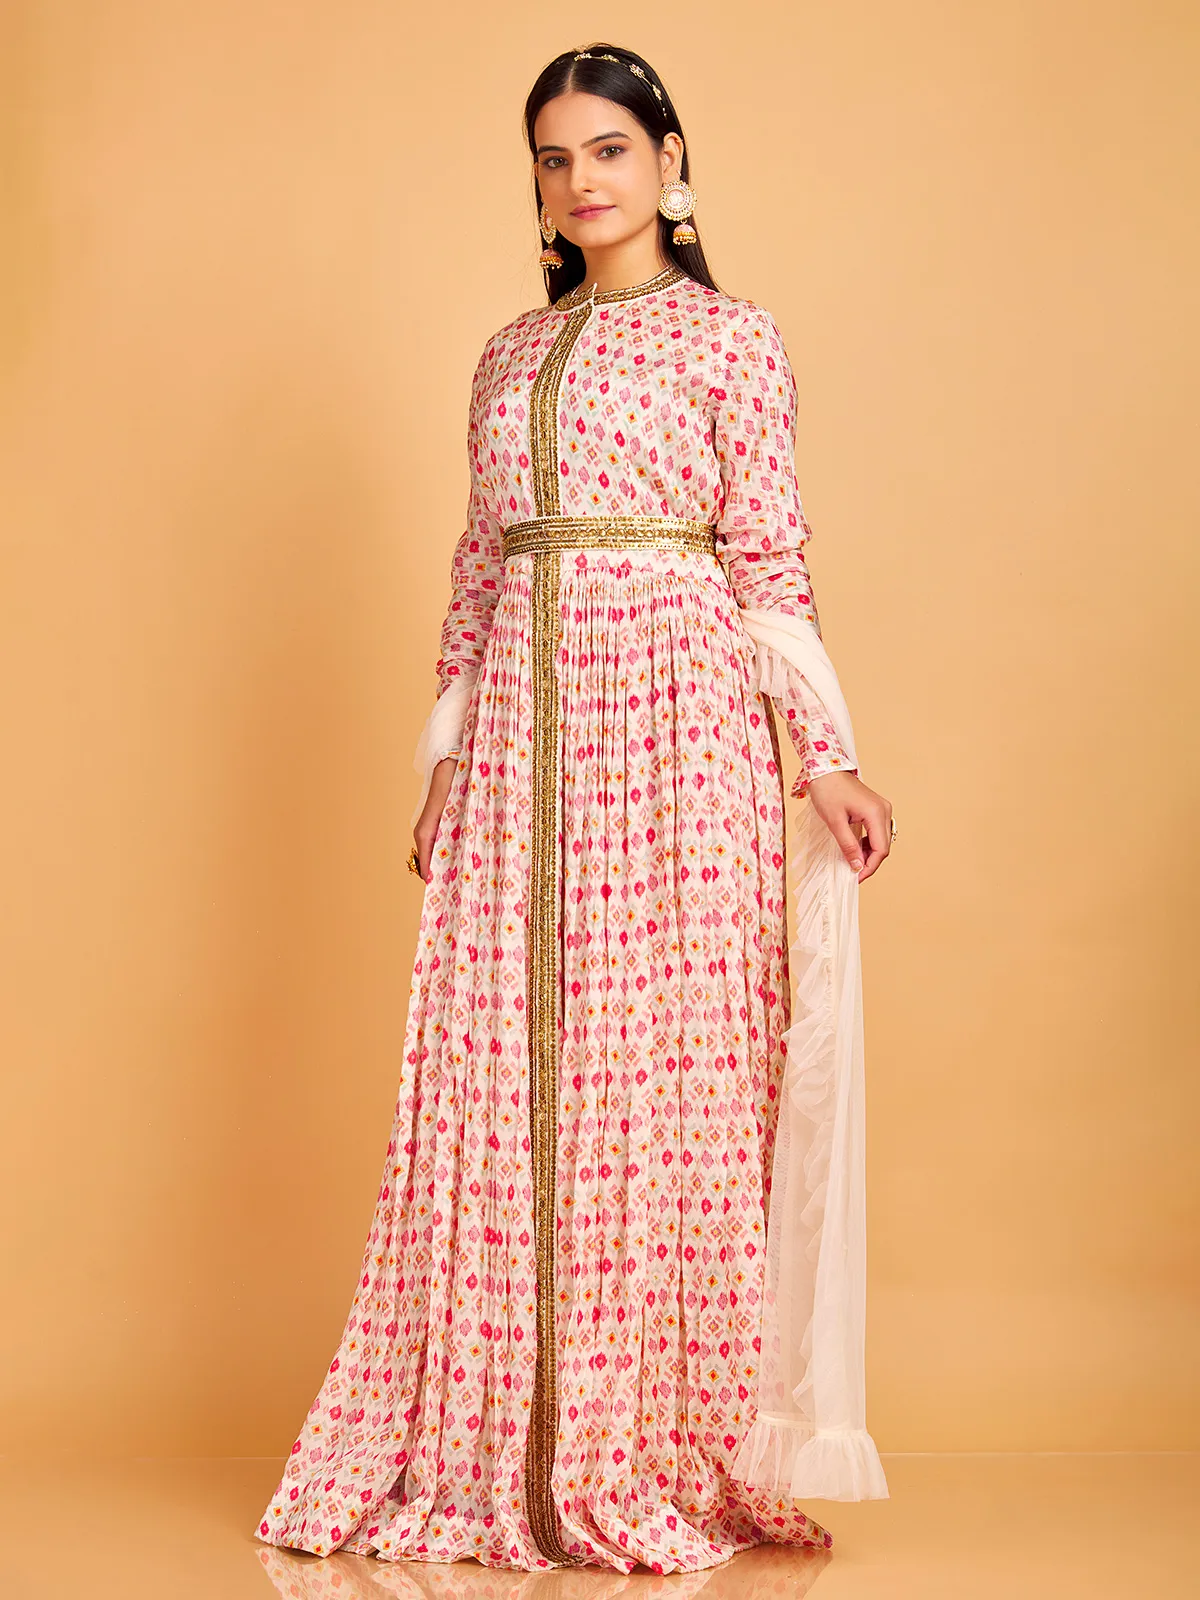 Cream silk anarkali suit with floral print